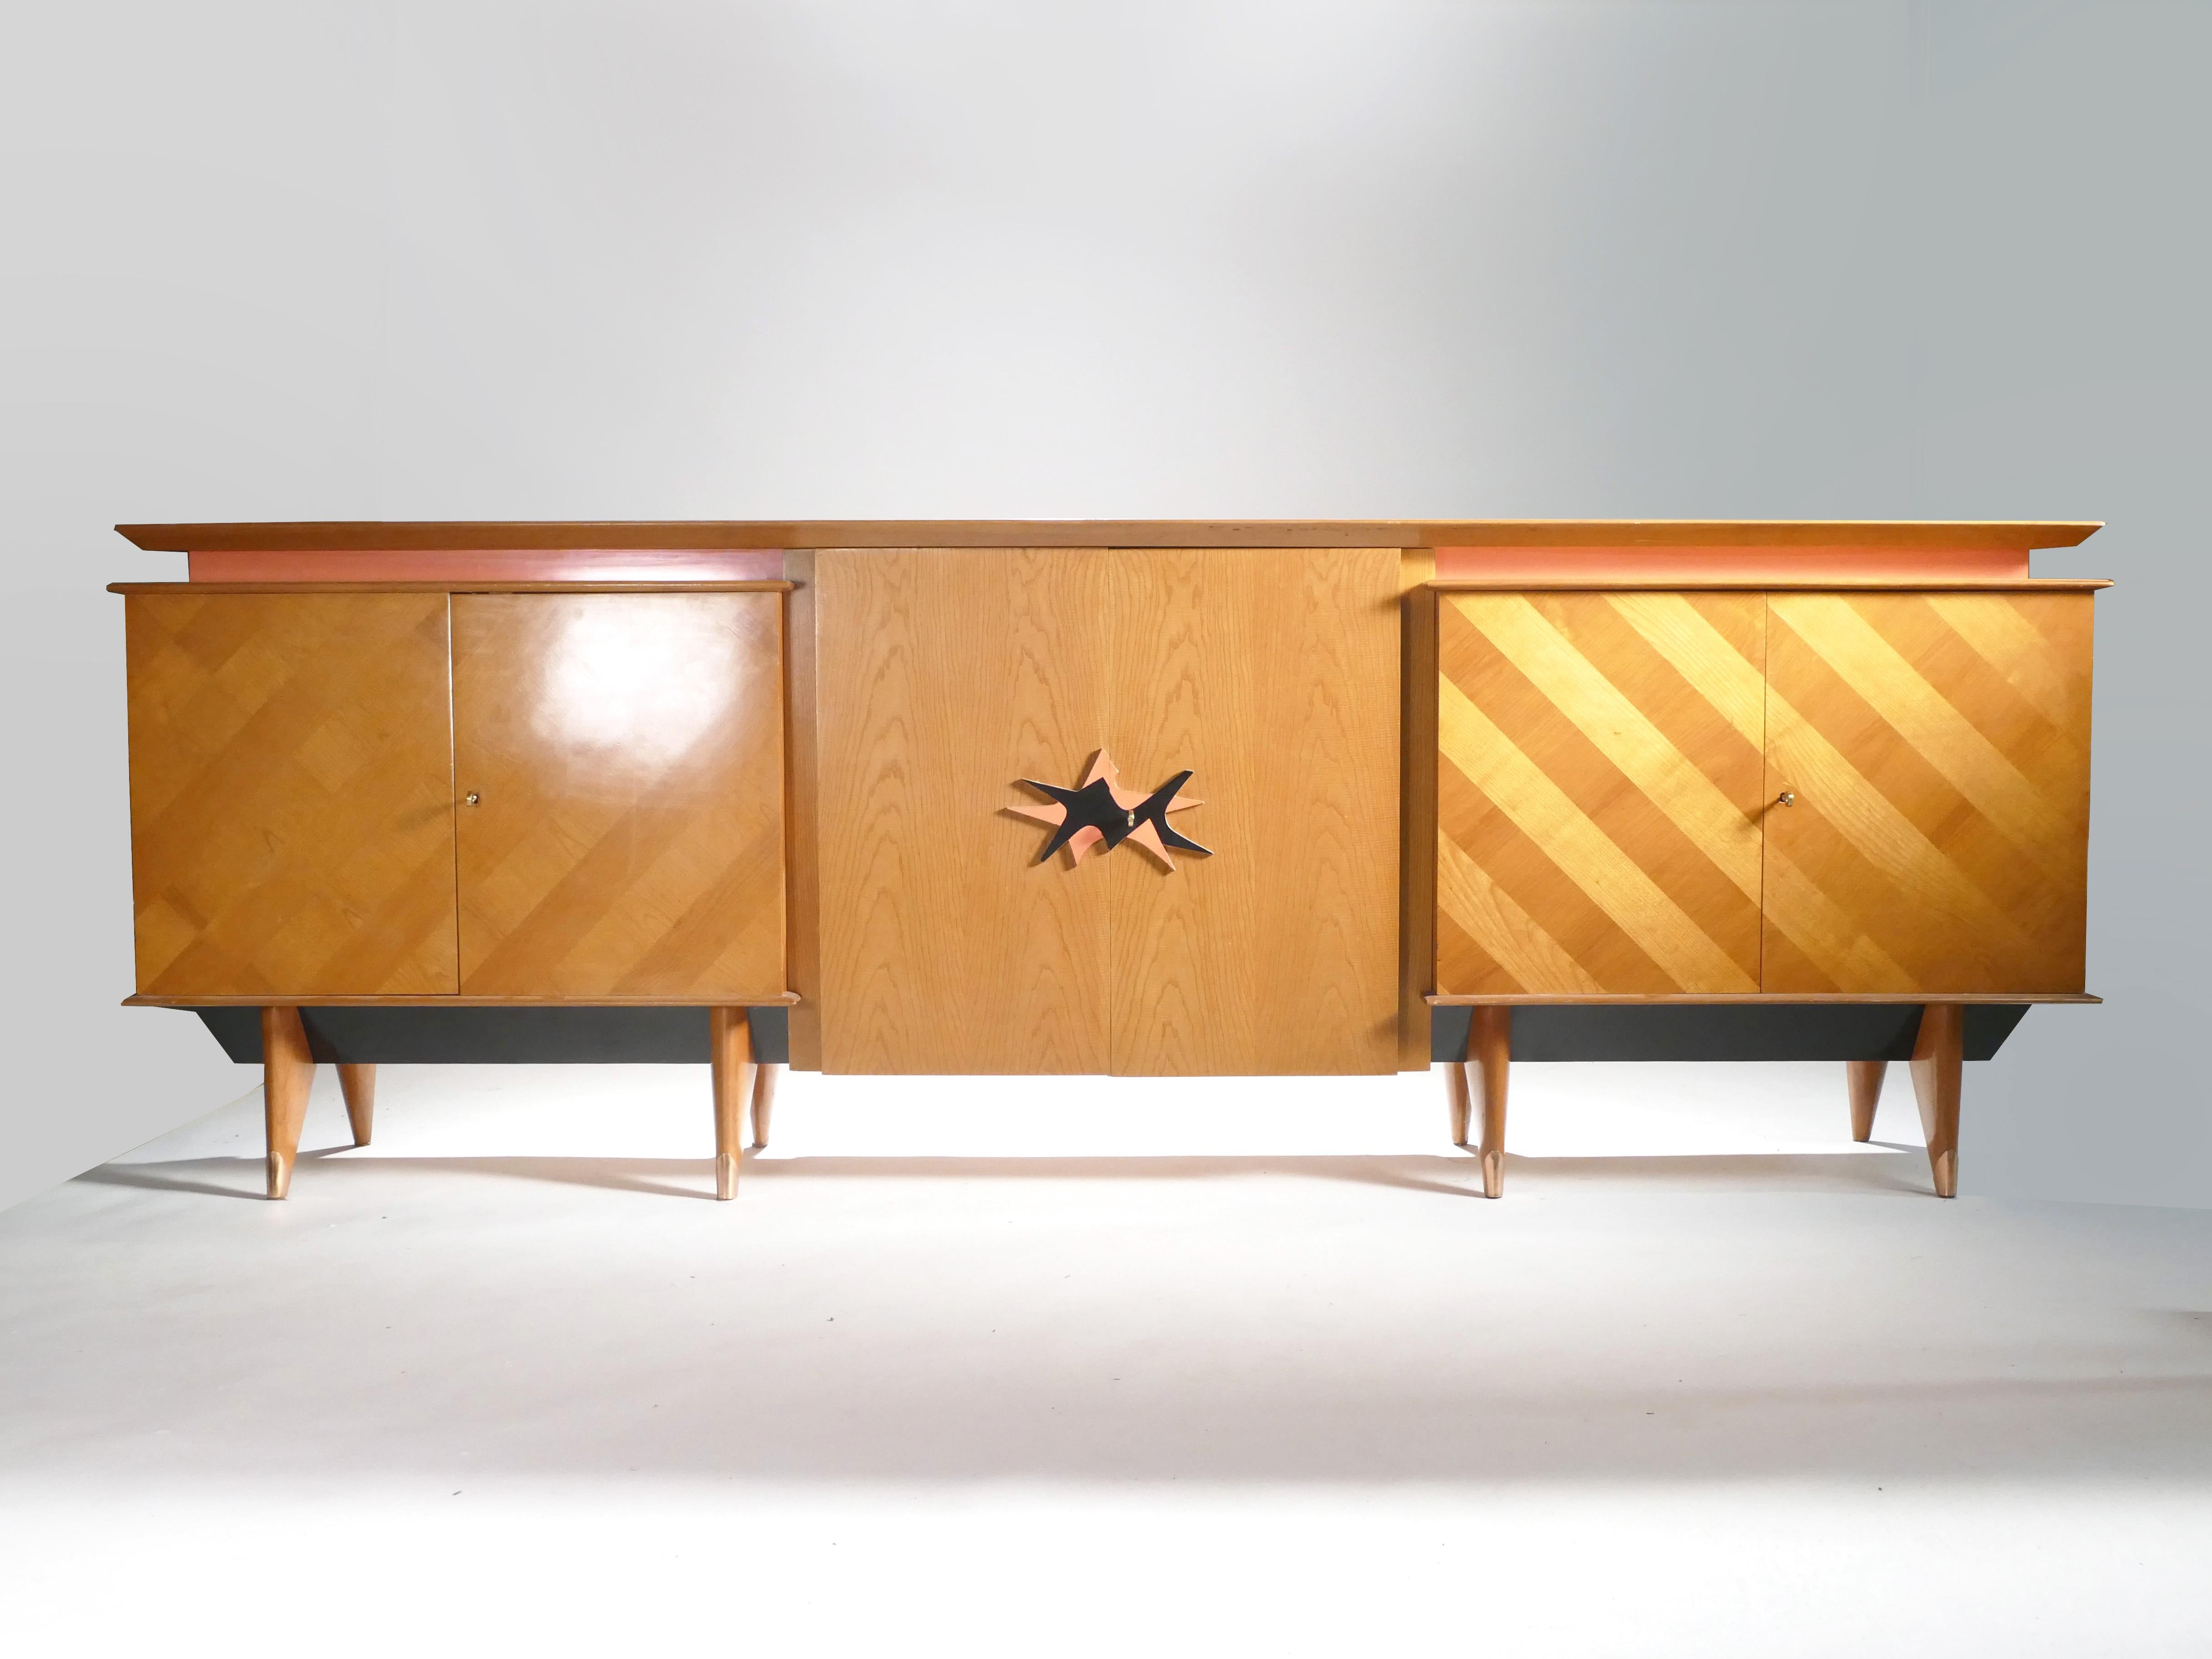 This attractive sideboard features a smooth oak build and bright copper accents. Monumental in size. The eye-catching coral and black decorative knobs on the centre cabinets, along with the contrasting wood stripes on the sideboard’s exterior, make